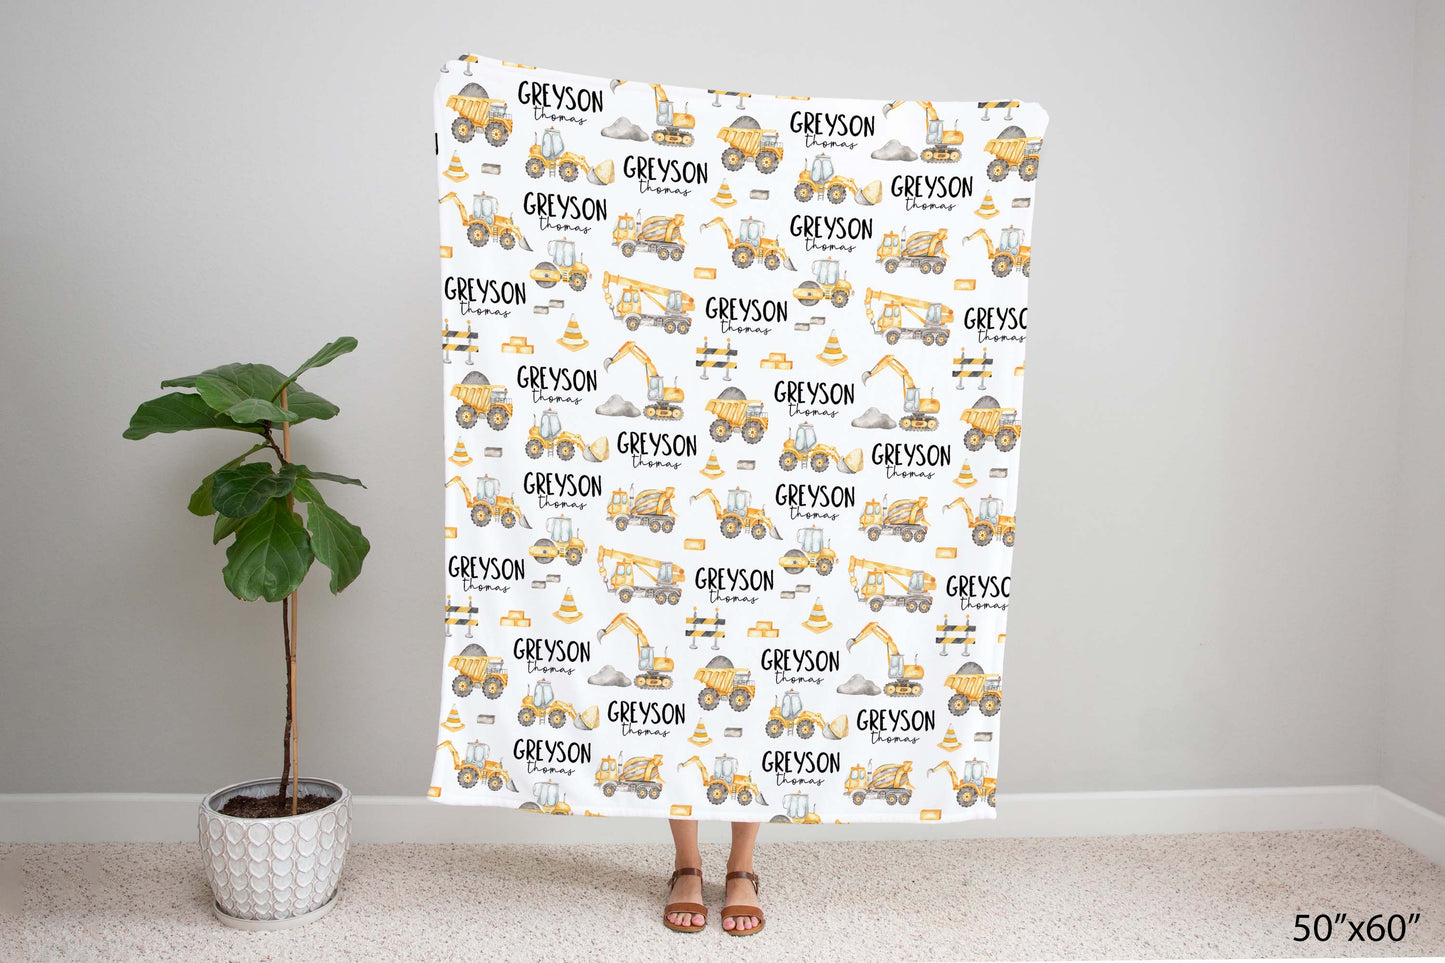 Construction Personalized Minky Blanket, Construction Nursery Bedding - Under construction